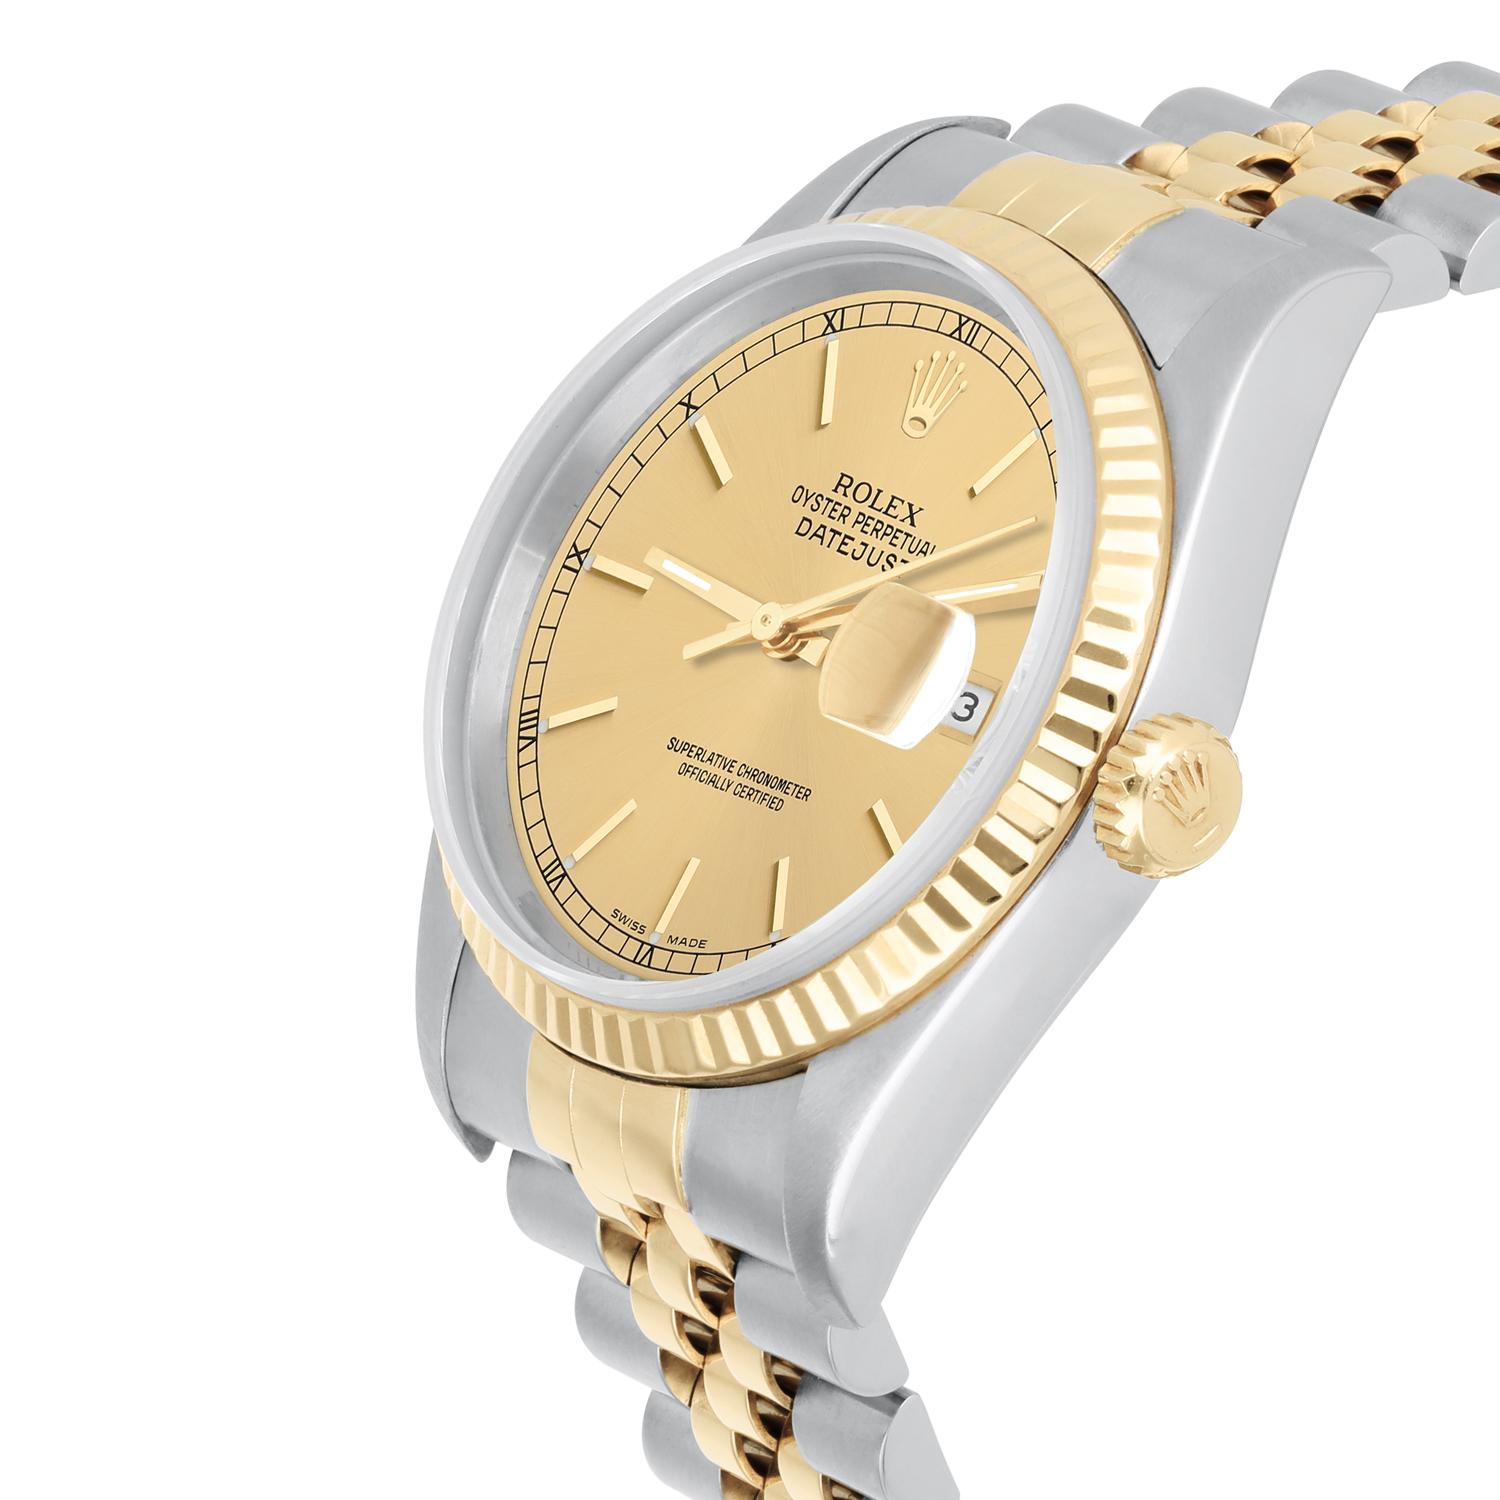 Rolex Datejust 36mm Two Tone Champagne Dial Jubilee 16233 Circa 1995 In Excellent Condition For Sale In New York, NY